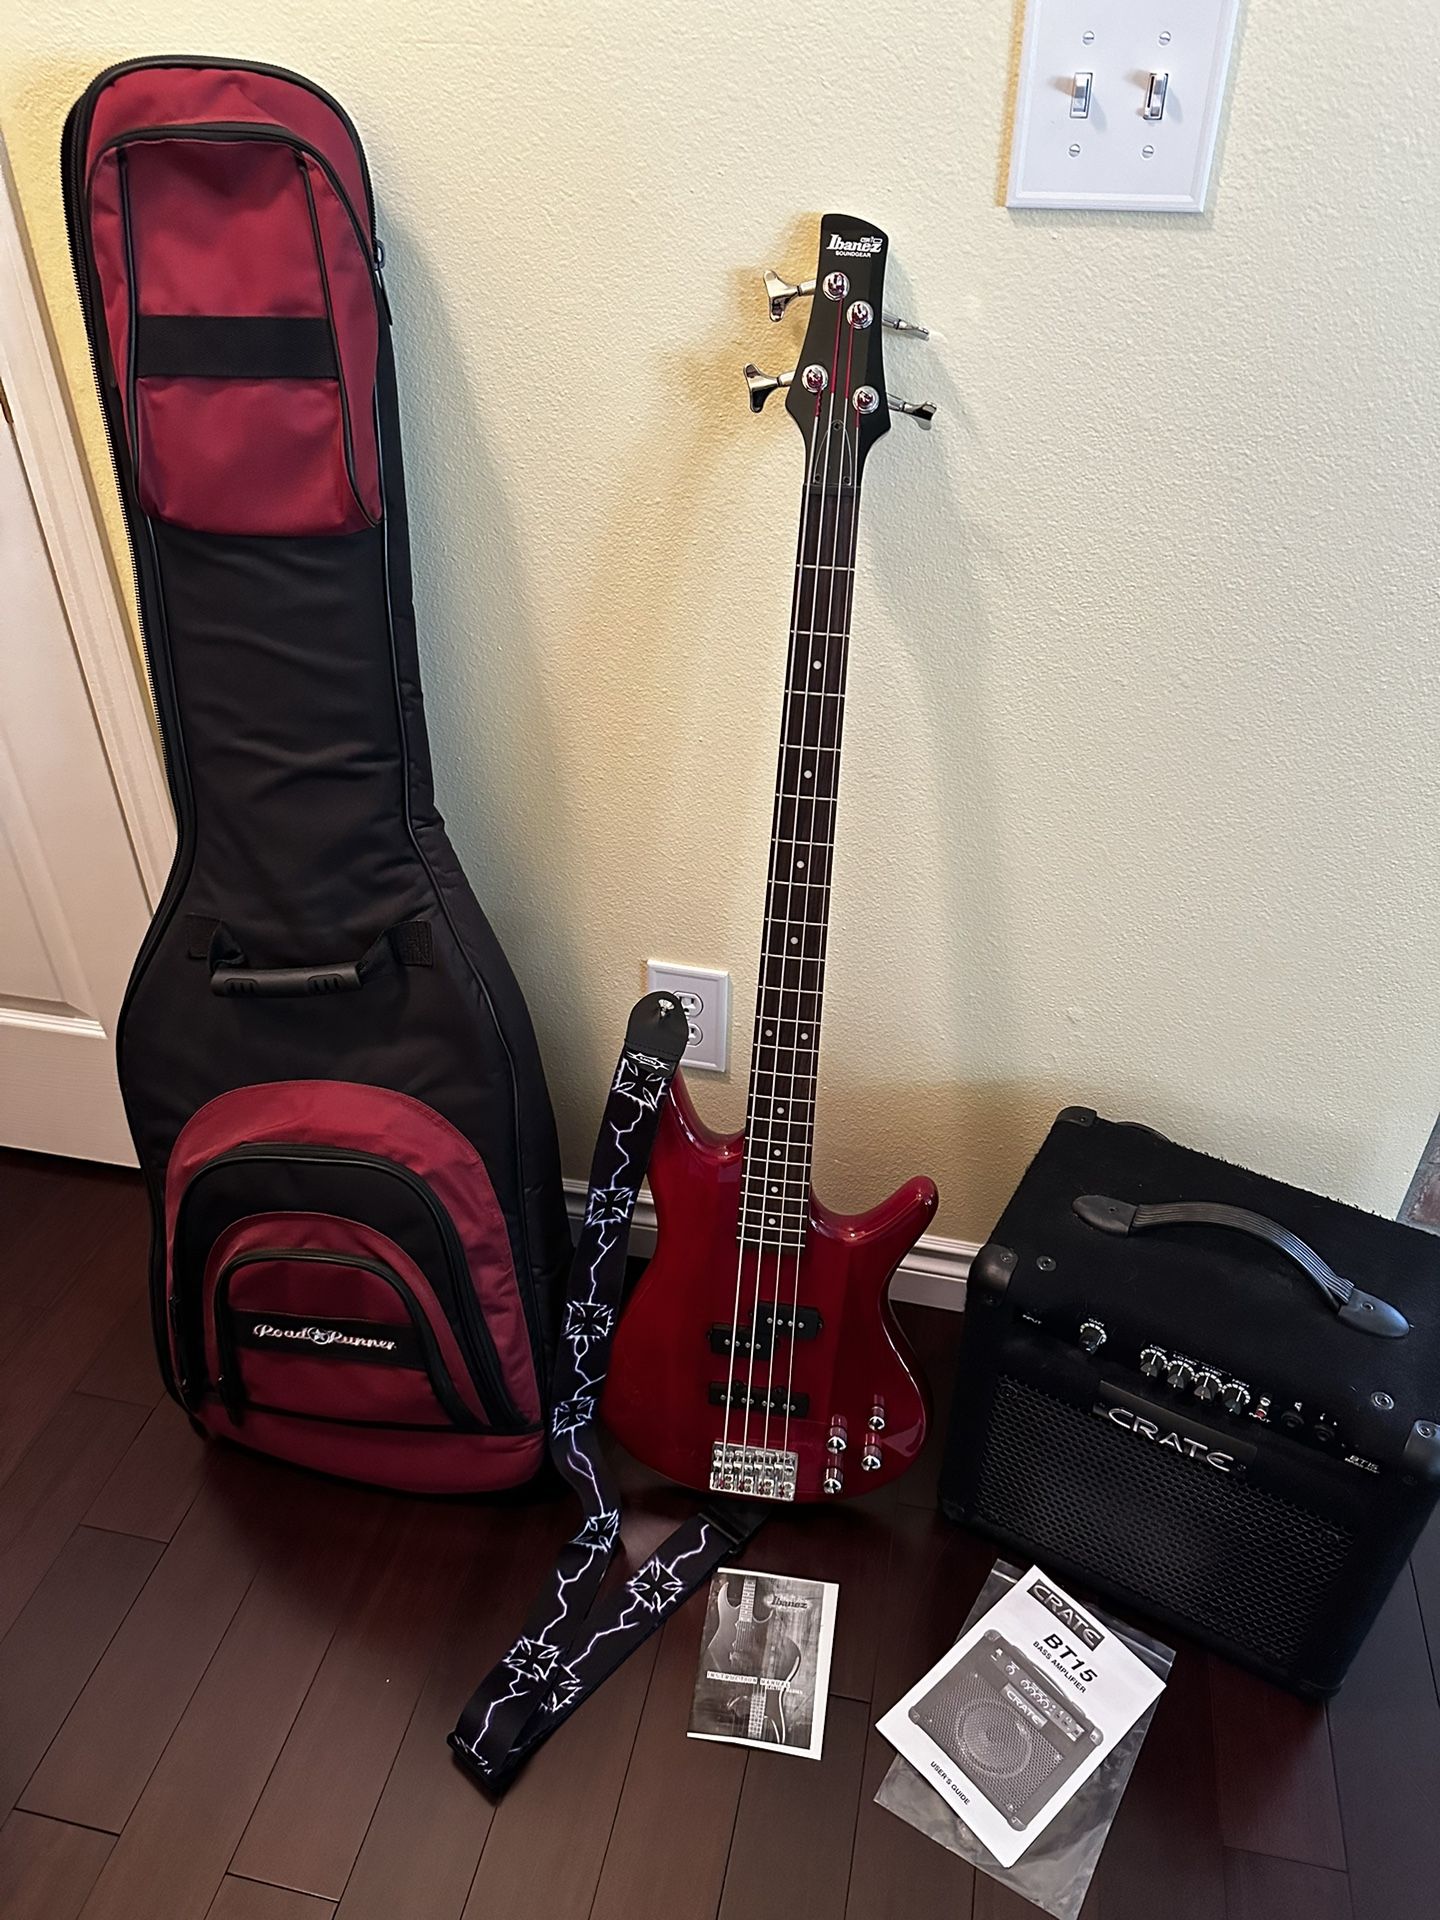 Ibanez Electric Bass with Crate Amp